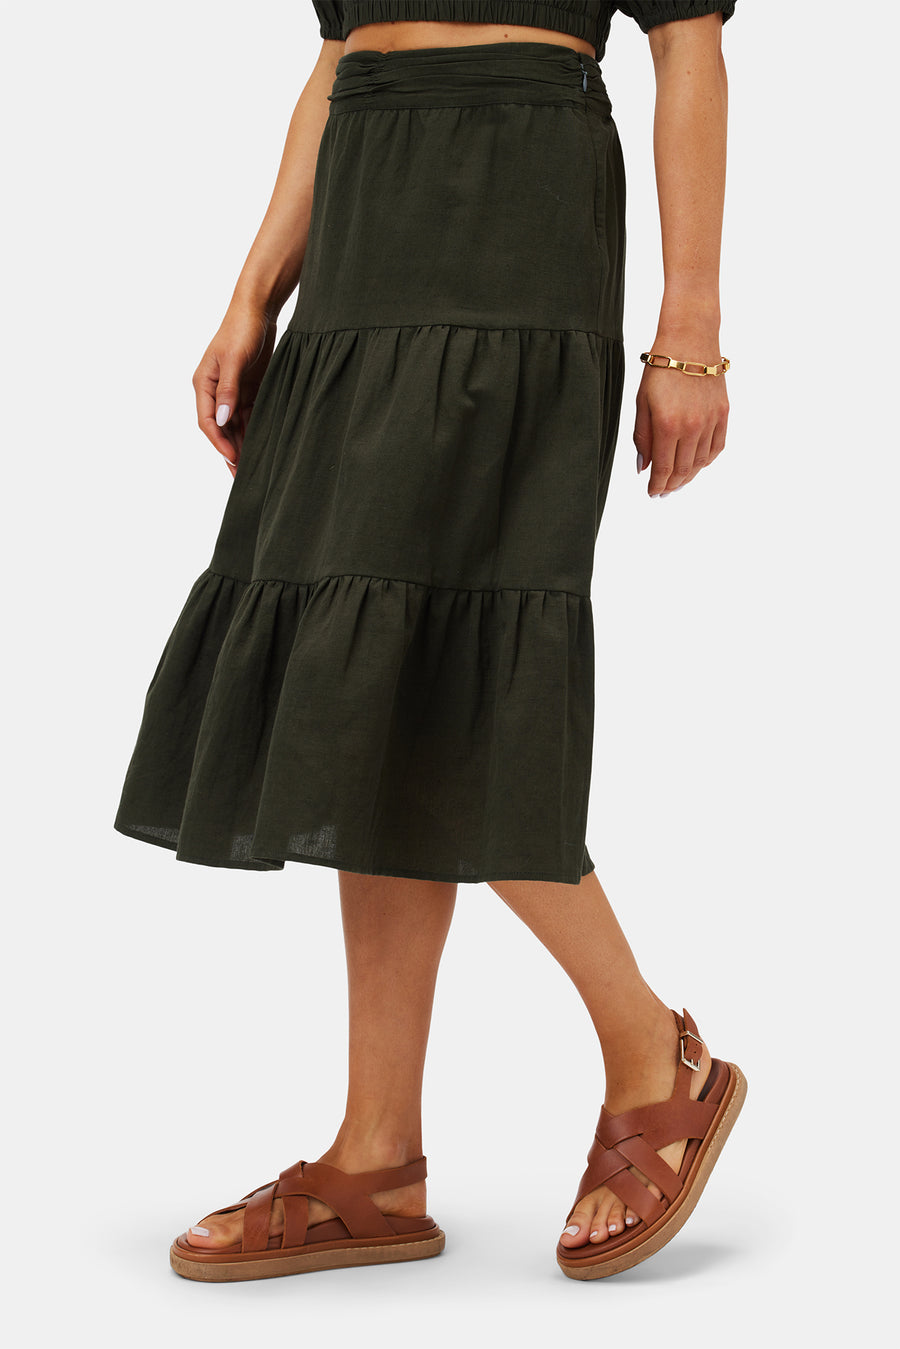 Silas Cotton Linen Skirt - Olive Green